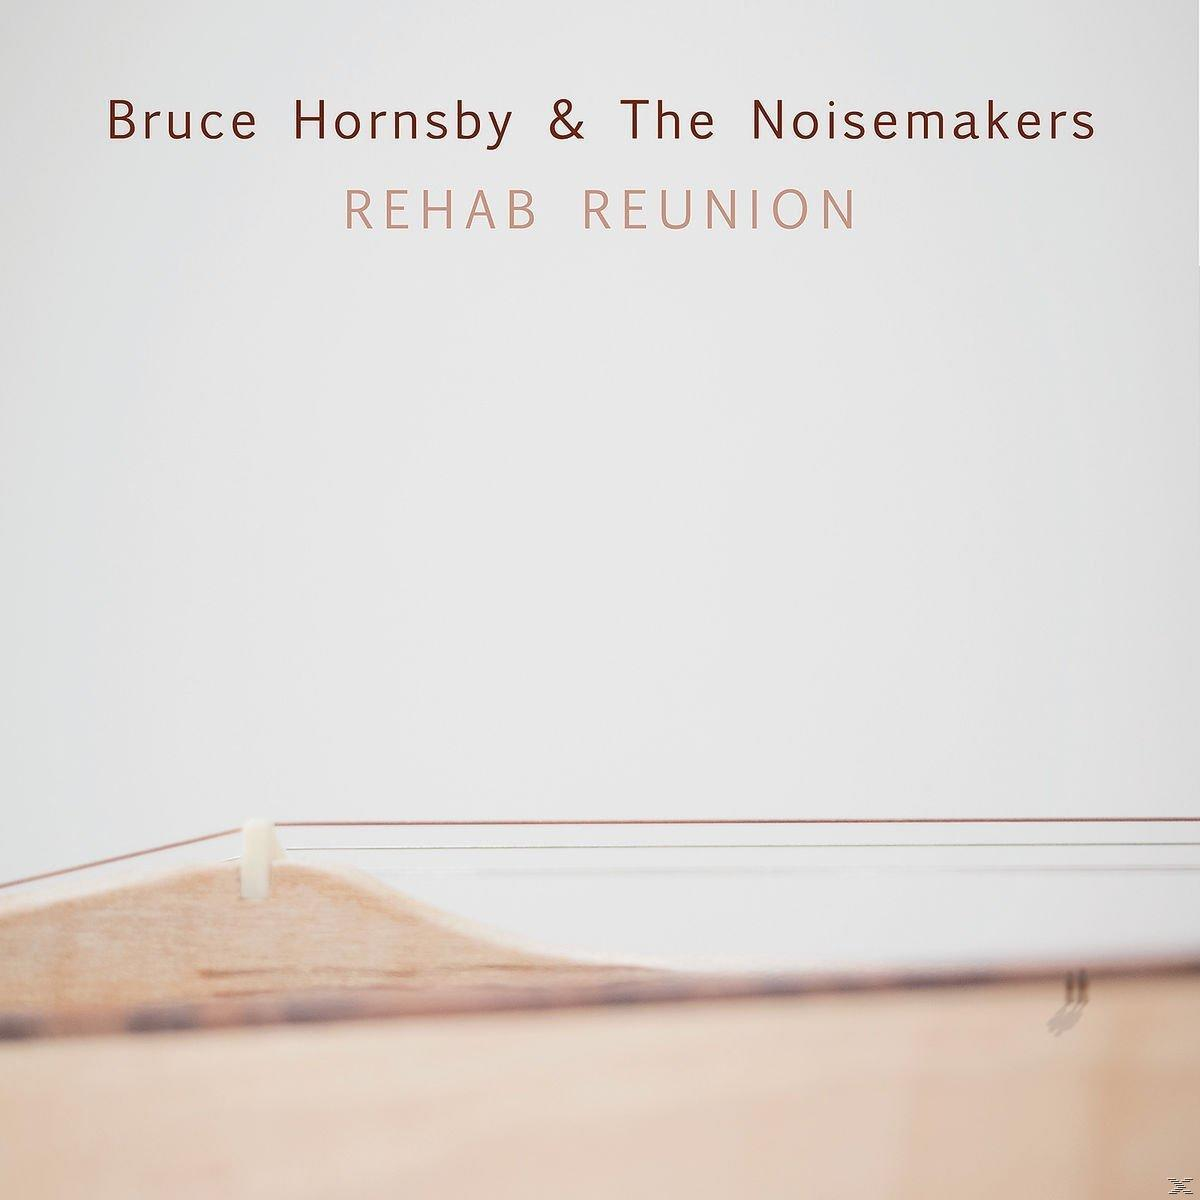 Bruce & The Reunion Noisemakers (CD) Hornsby - - Rehab